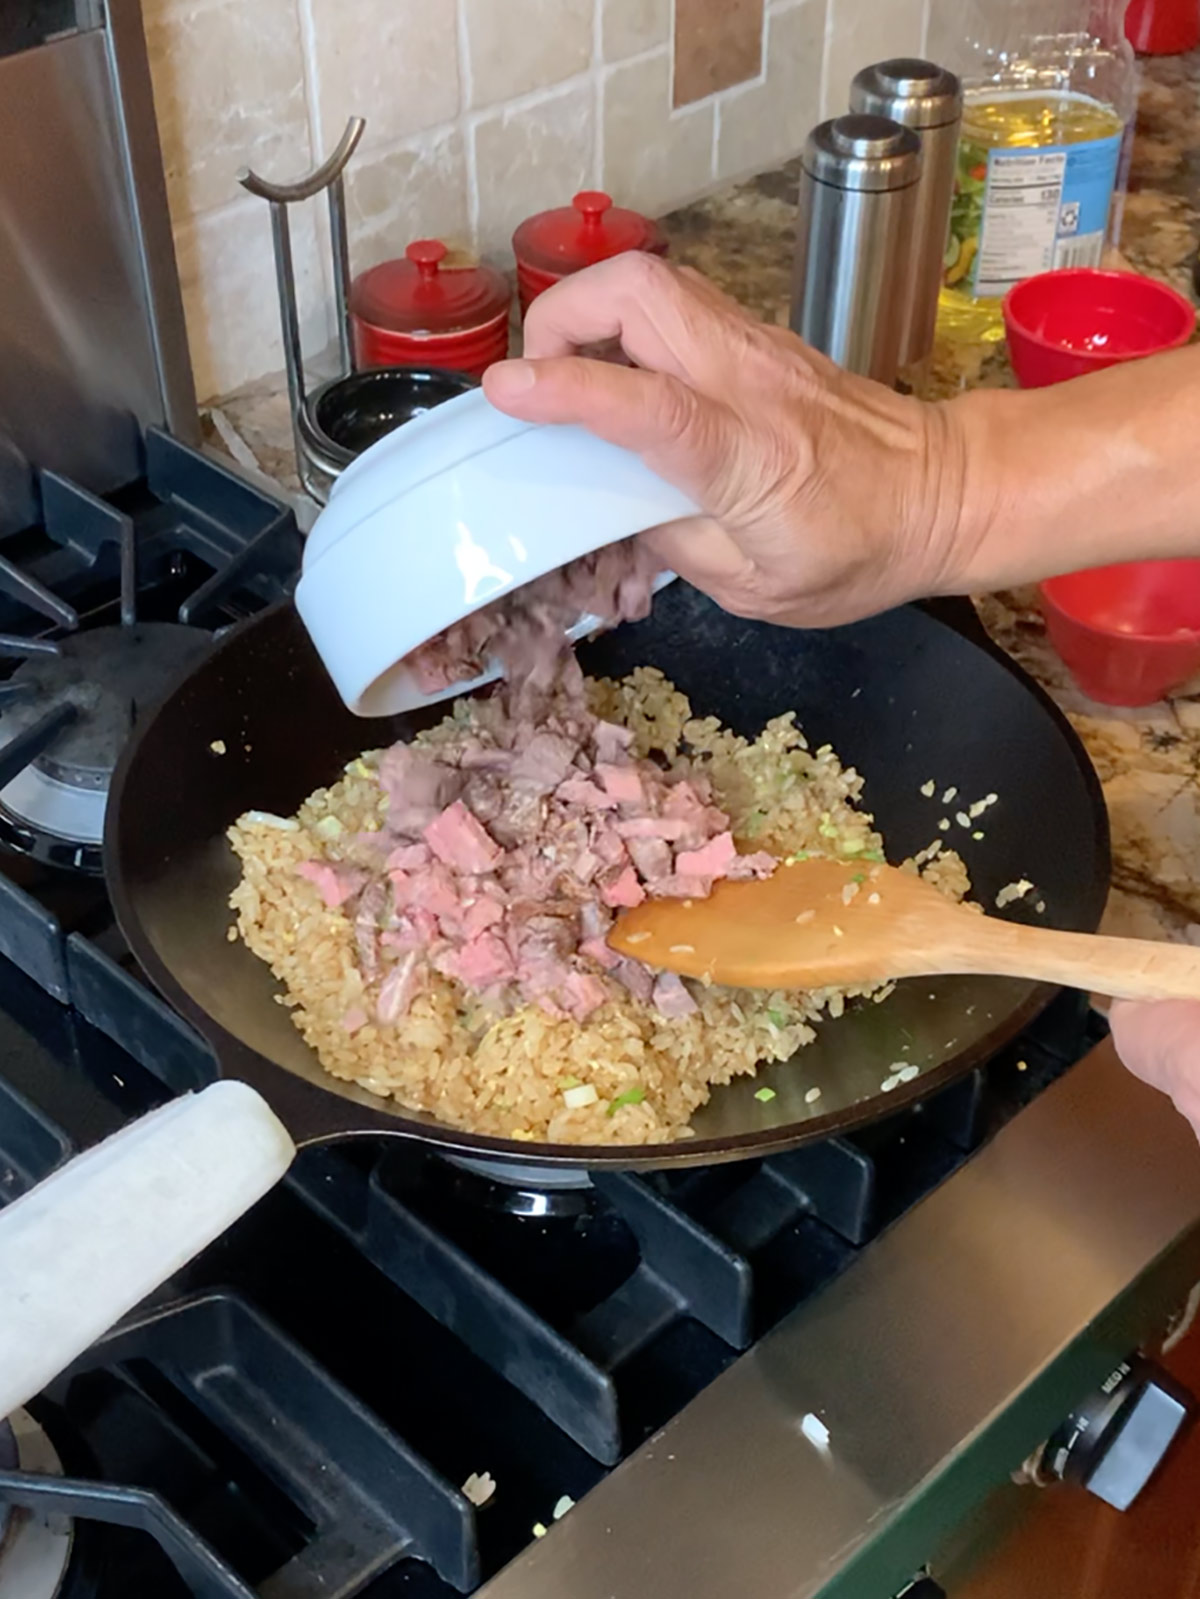 Finally add prime rib to fried rice mixture in wok.